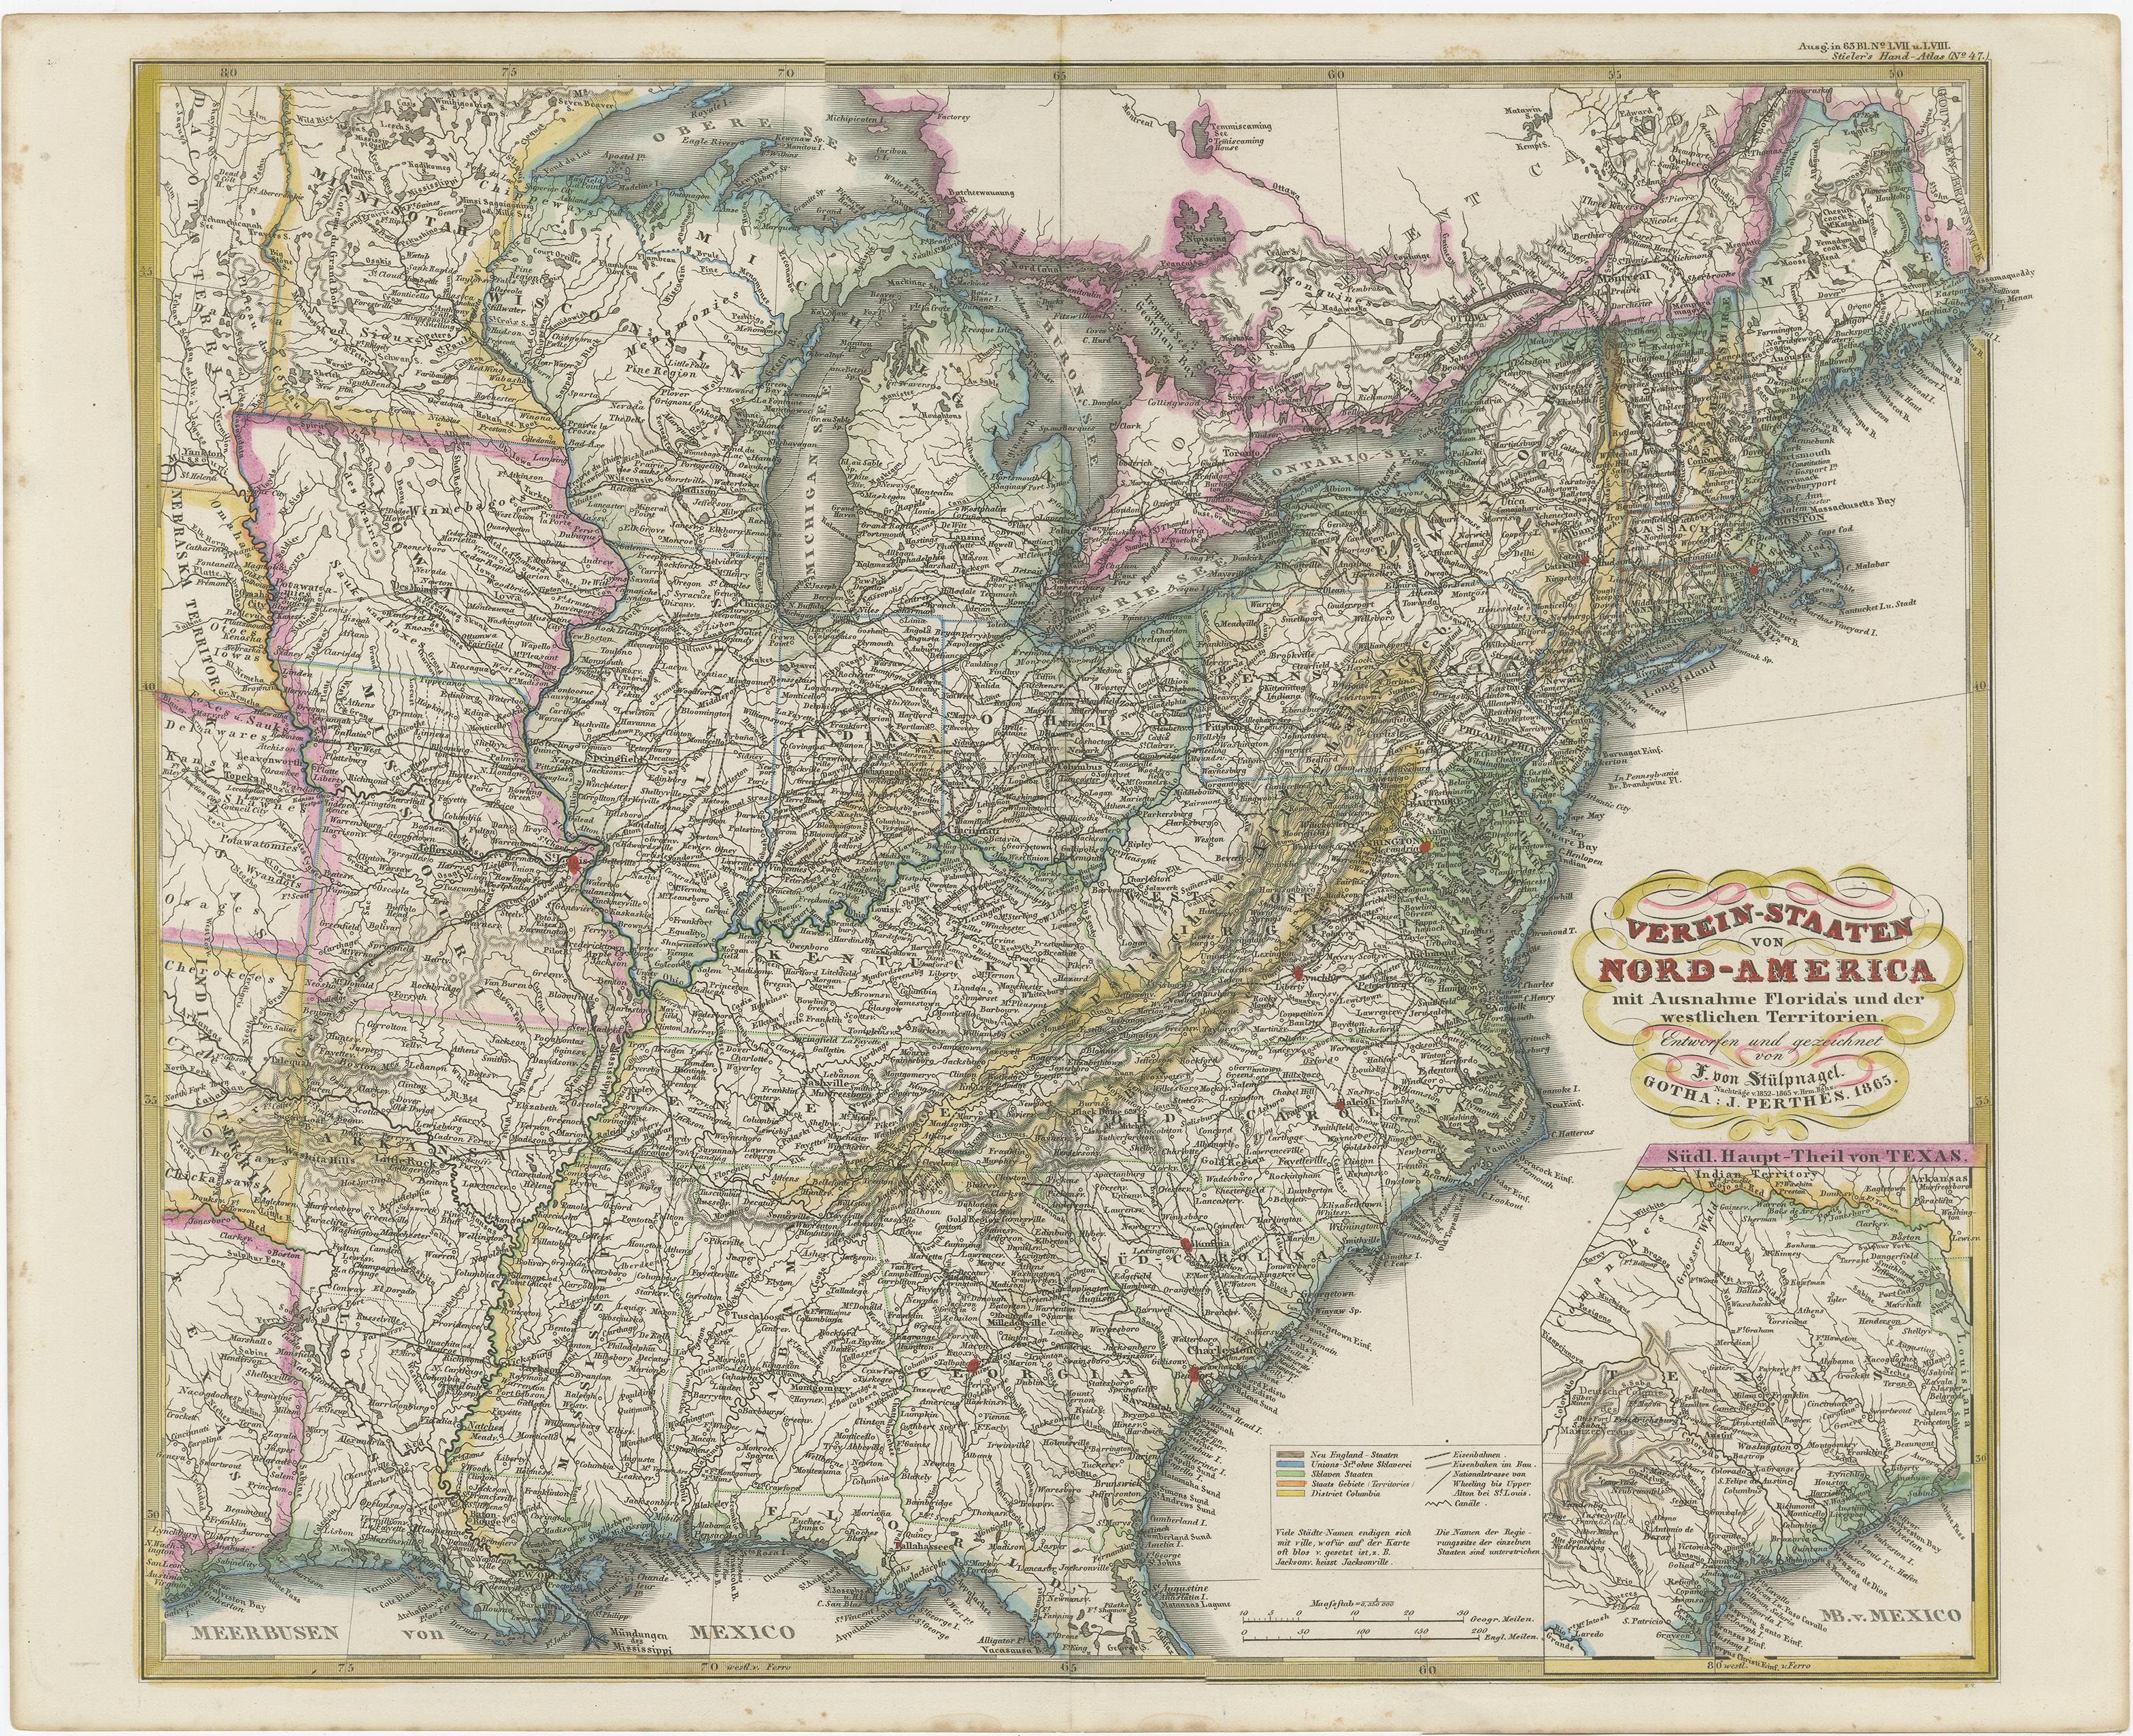 Antique map titled 'Verein-Staaten von Nord-America mit Ausnahme Florida's und der Westlichen Territorien'. This map extends as far west as Louisiana and only includes the northern portion of Florida. Inset map of the 